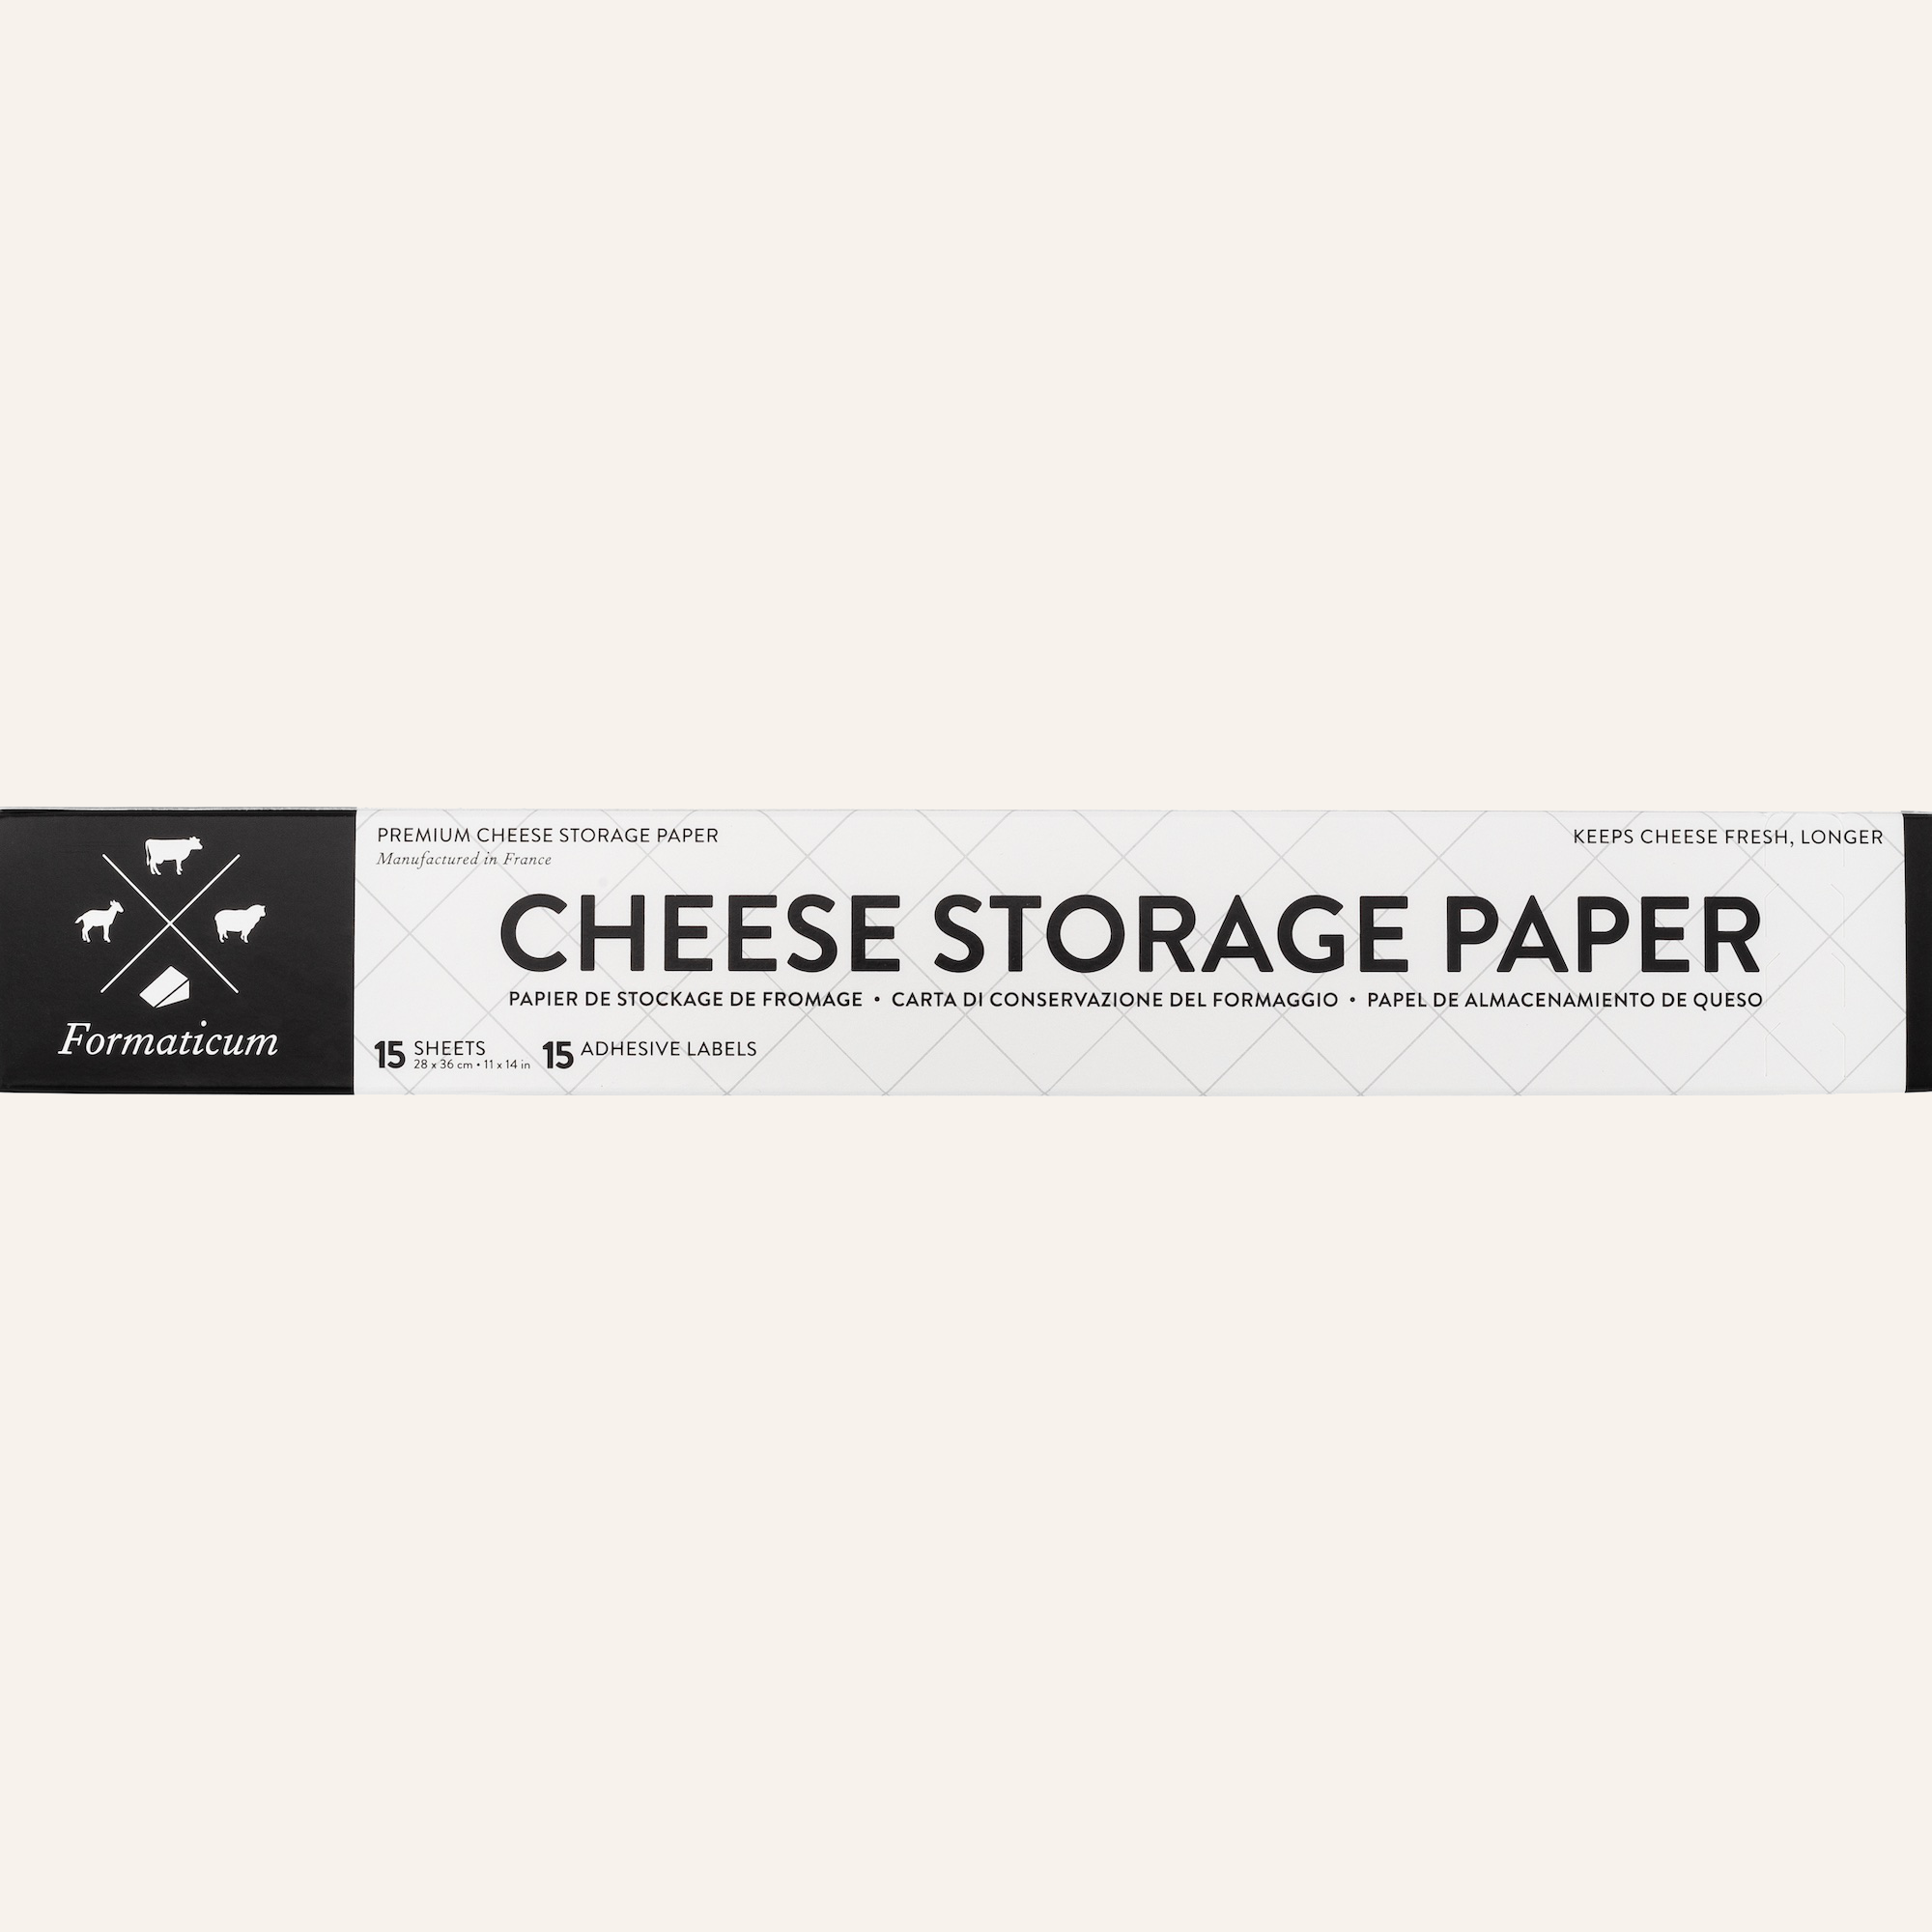  Formaticum Cheese Storage Wax Coated Paper - Porous Wax Sheets  From France - Keep Cheese or Charcuterie Fresh - Professional Grade Cheese  Paper for Wrapping Cheese - 11 x 14 (15